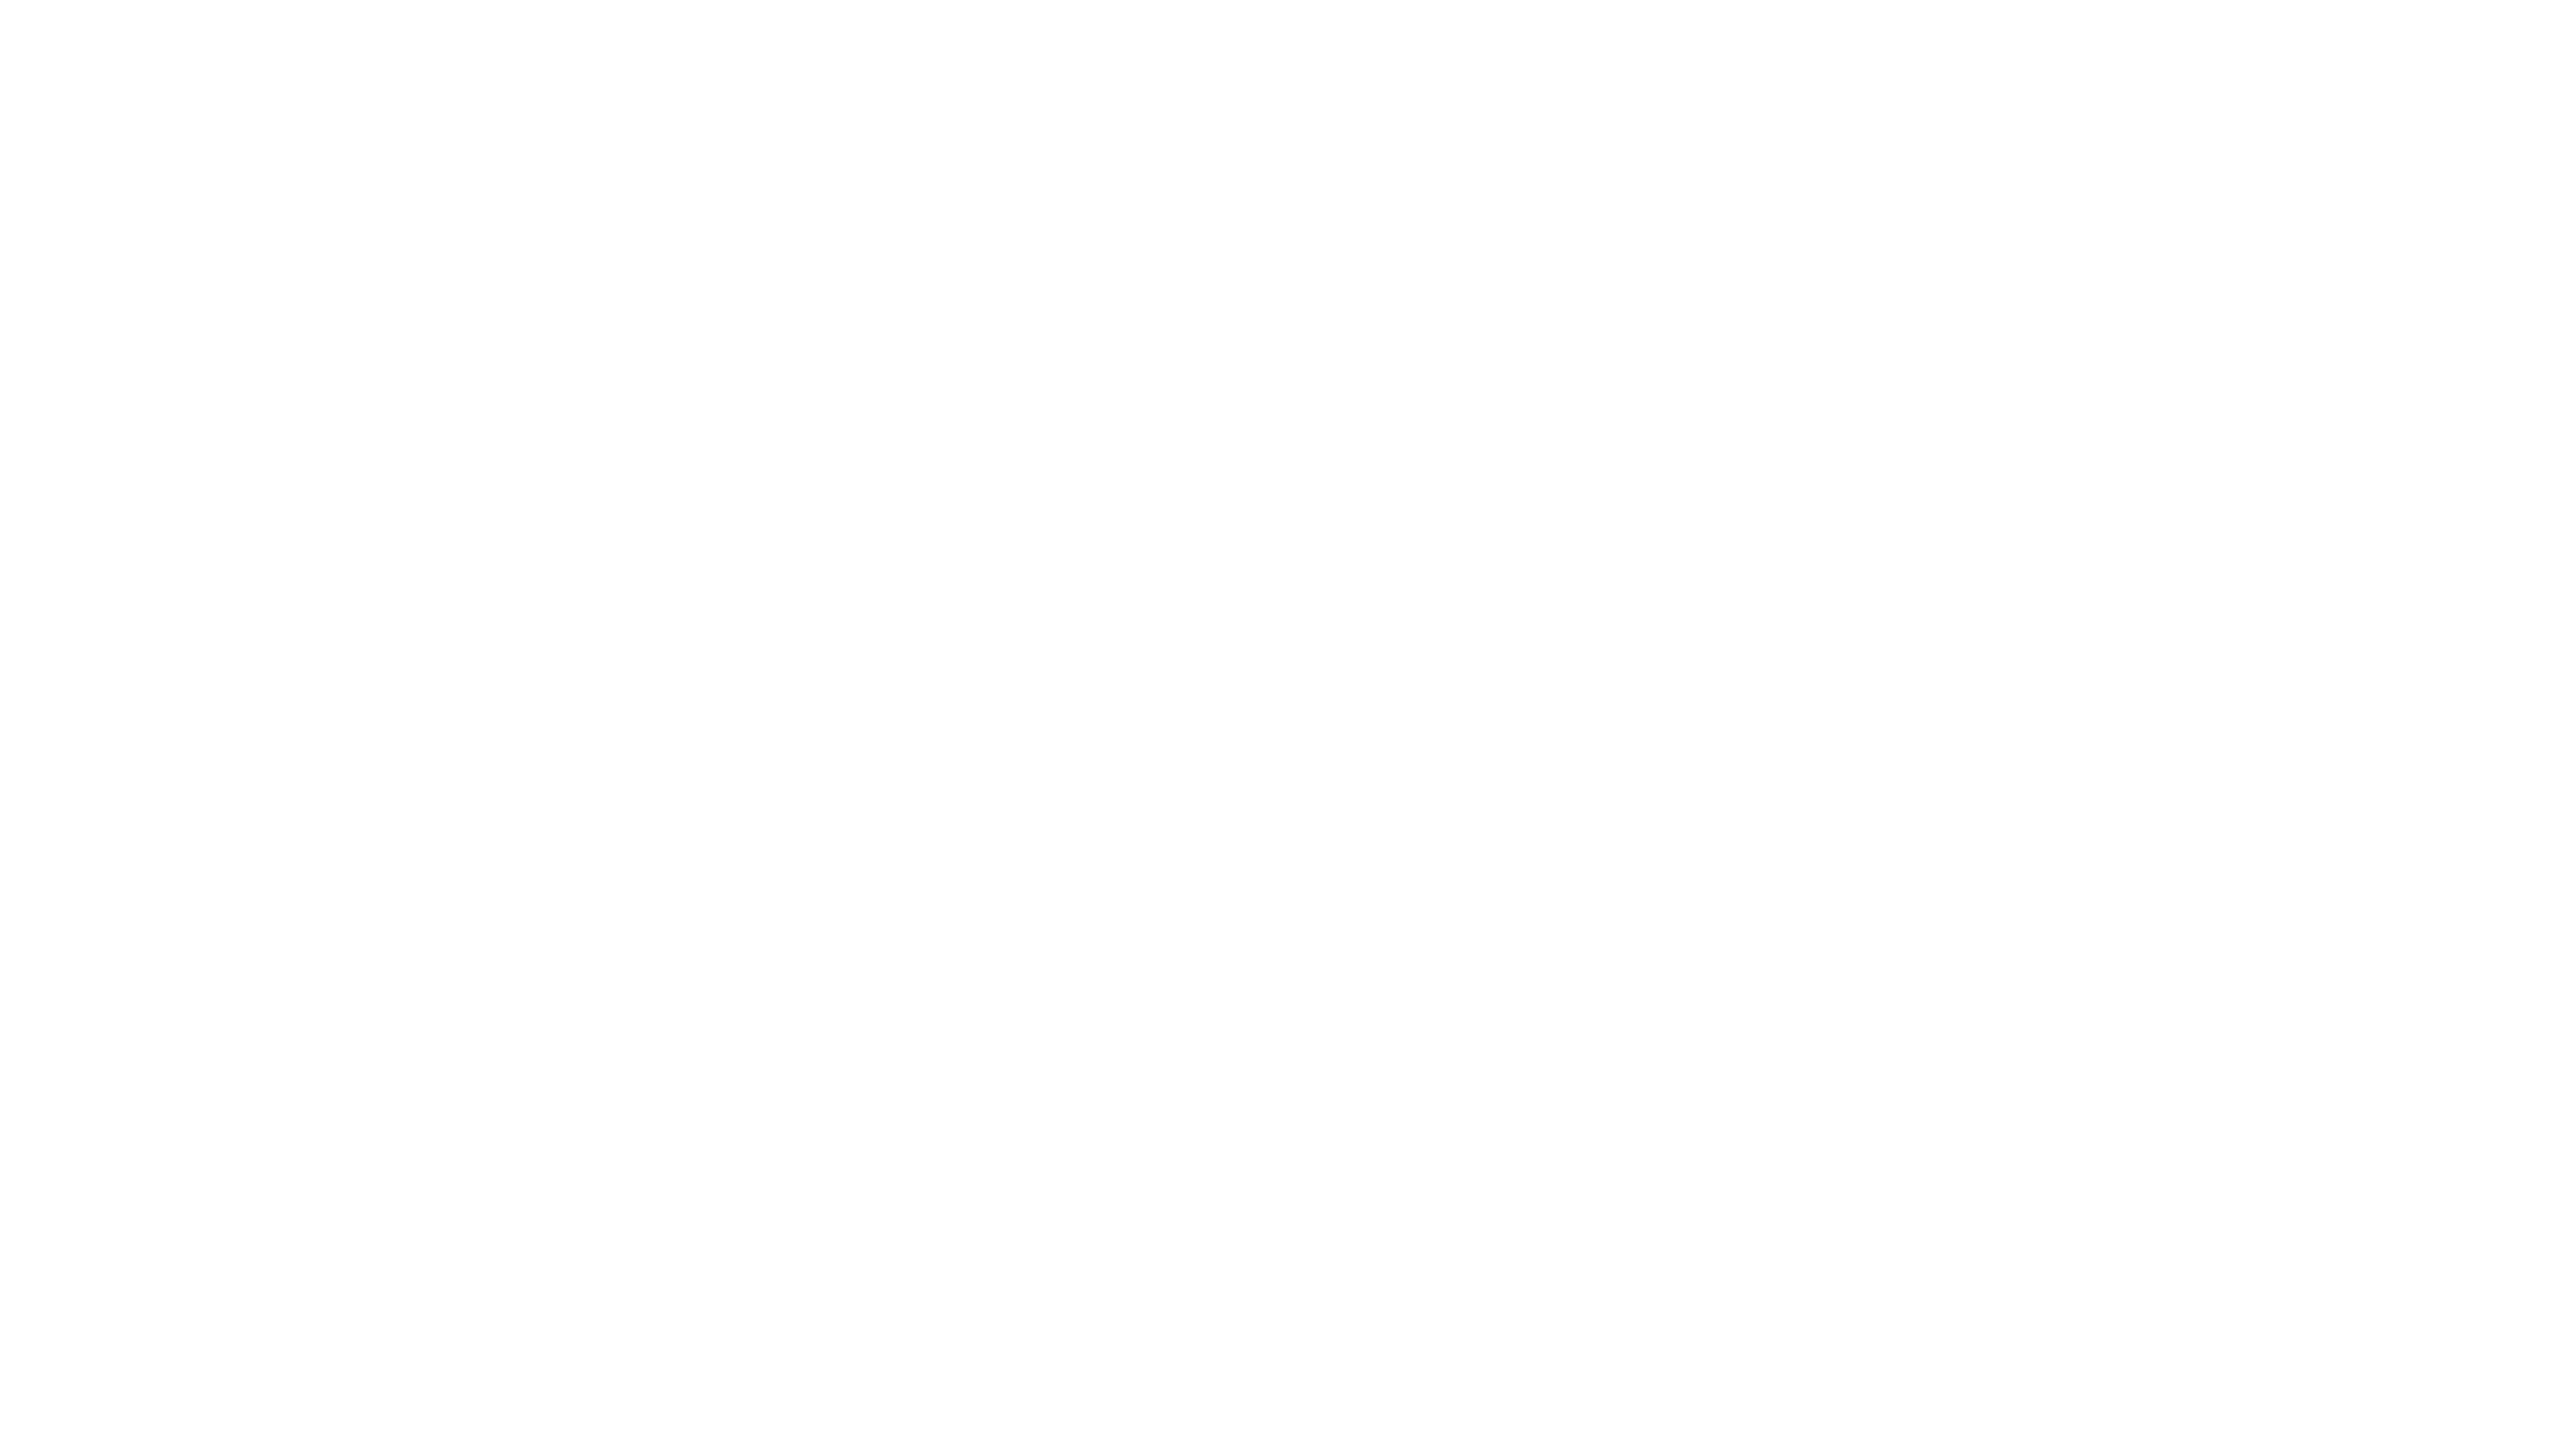 Focus On What Matters